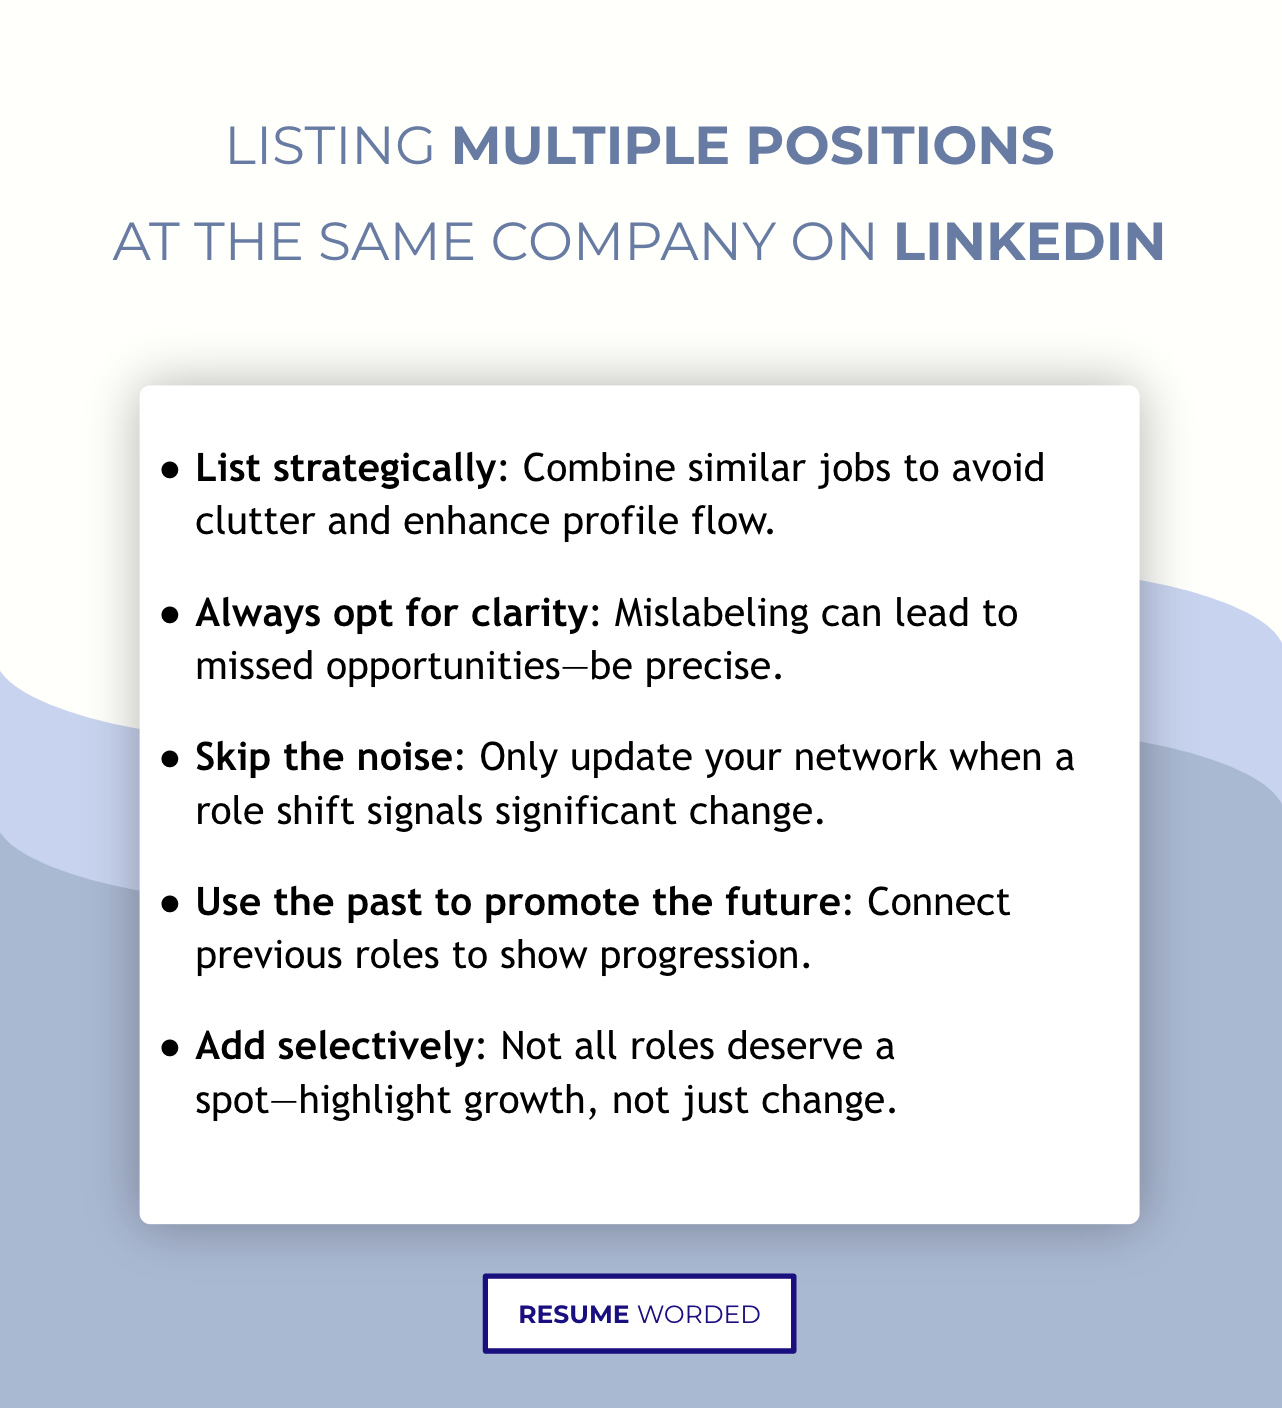 Key advice to remember when listing multiple positions at the same company on LinkedIn